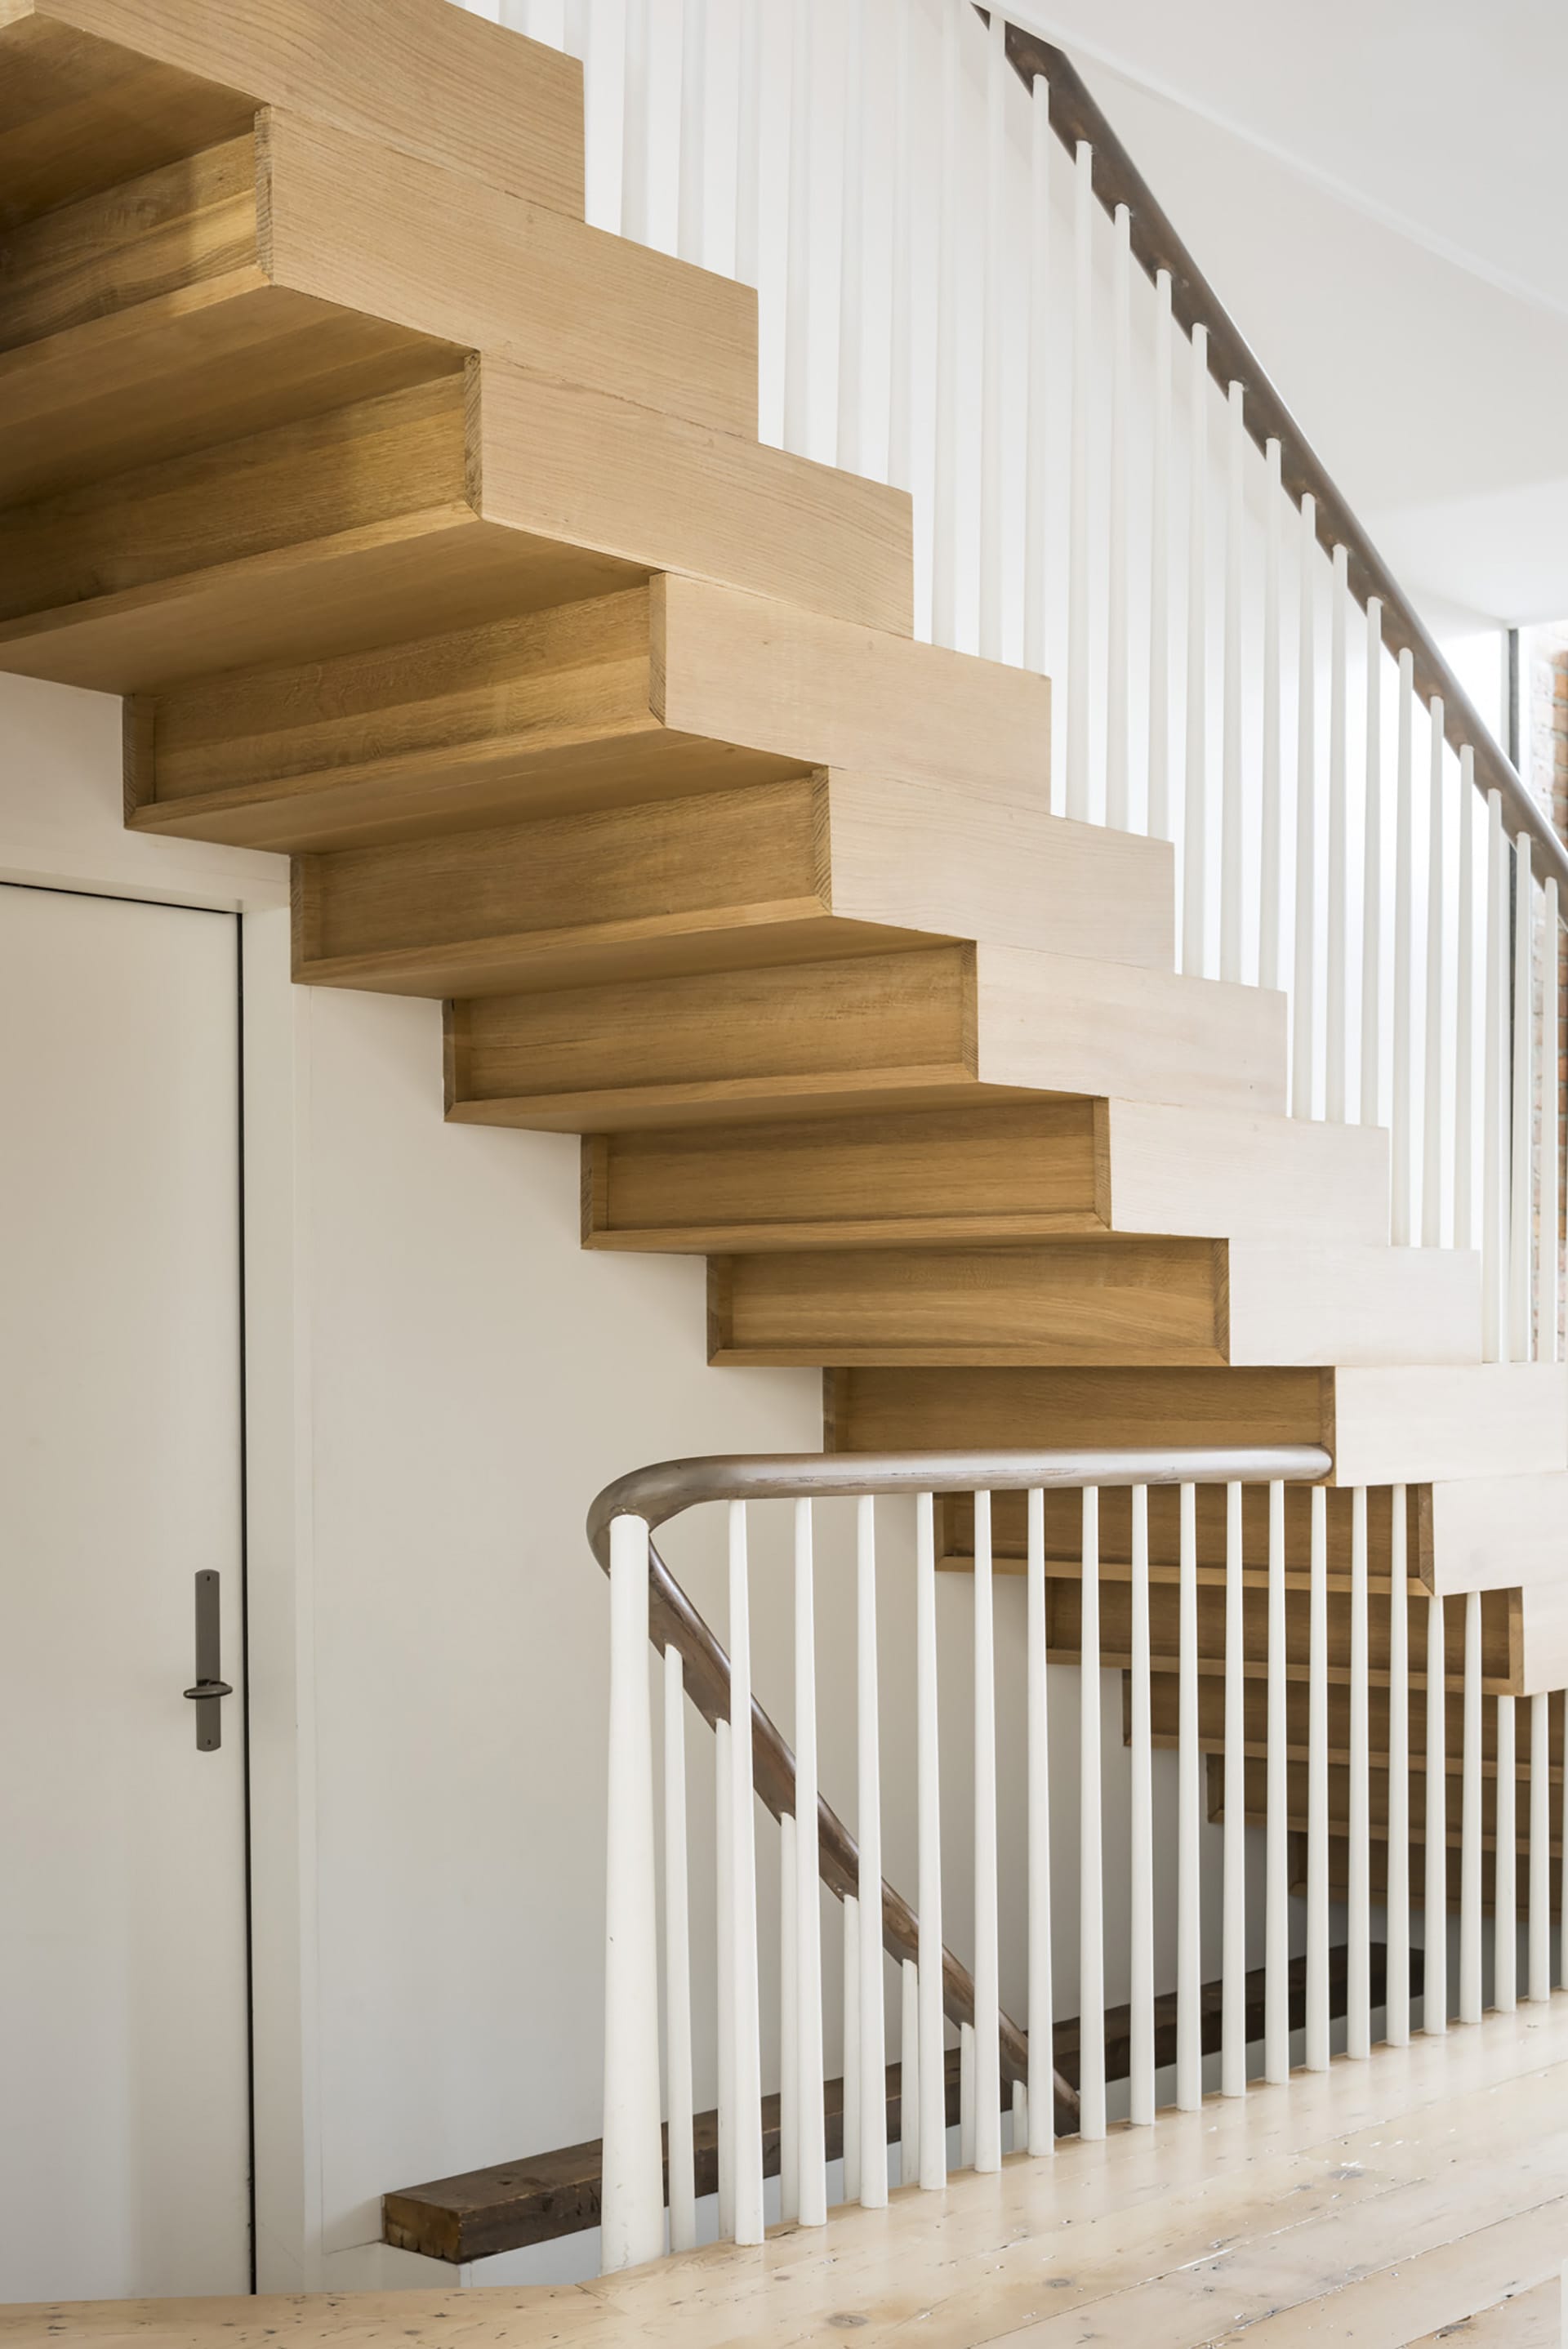 Staircase with stacked wood risers, white spindles, and a dark wood handrail.